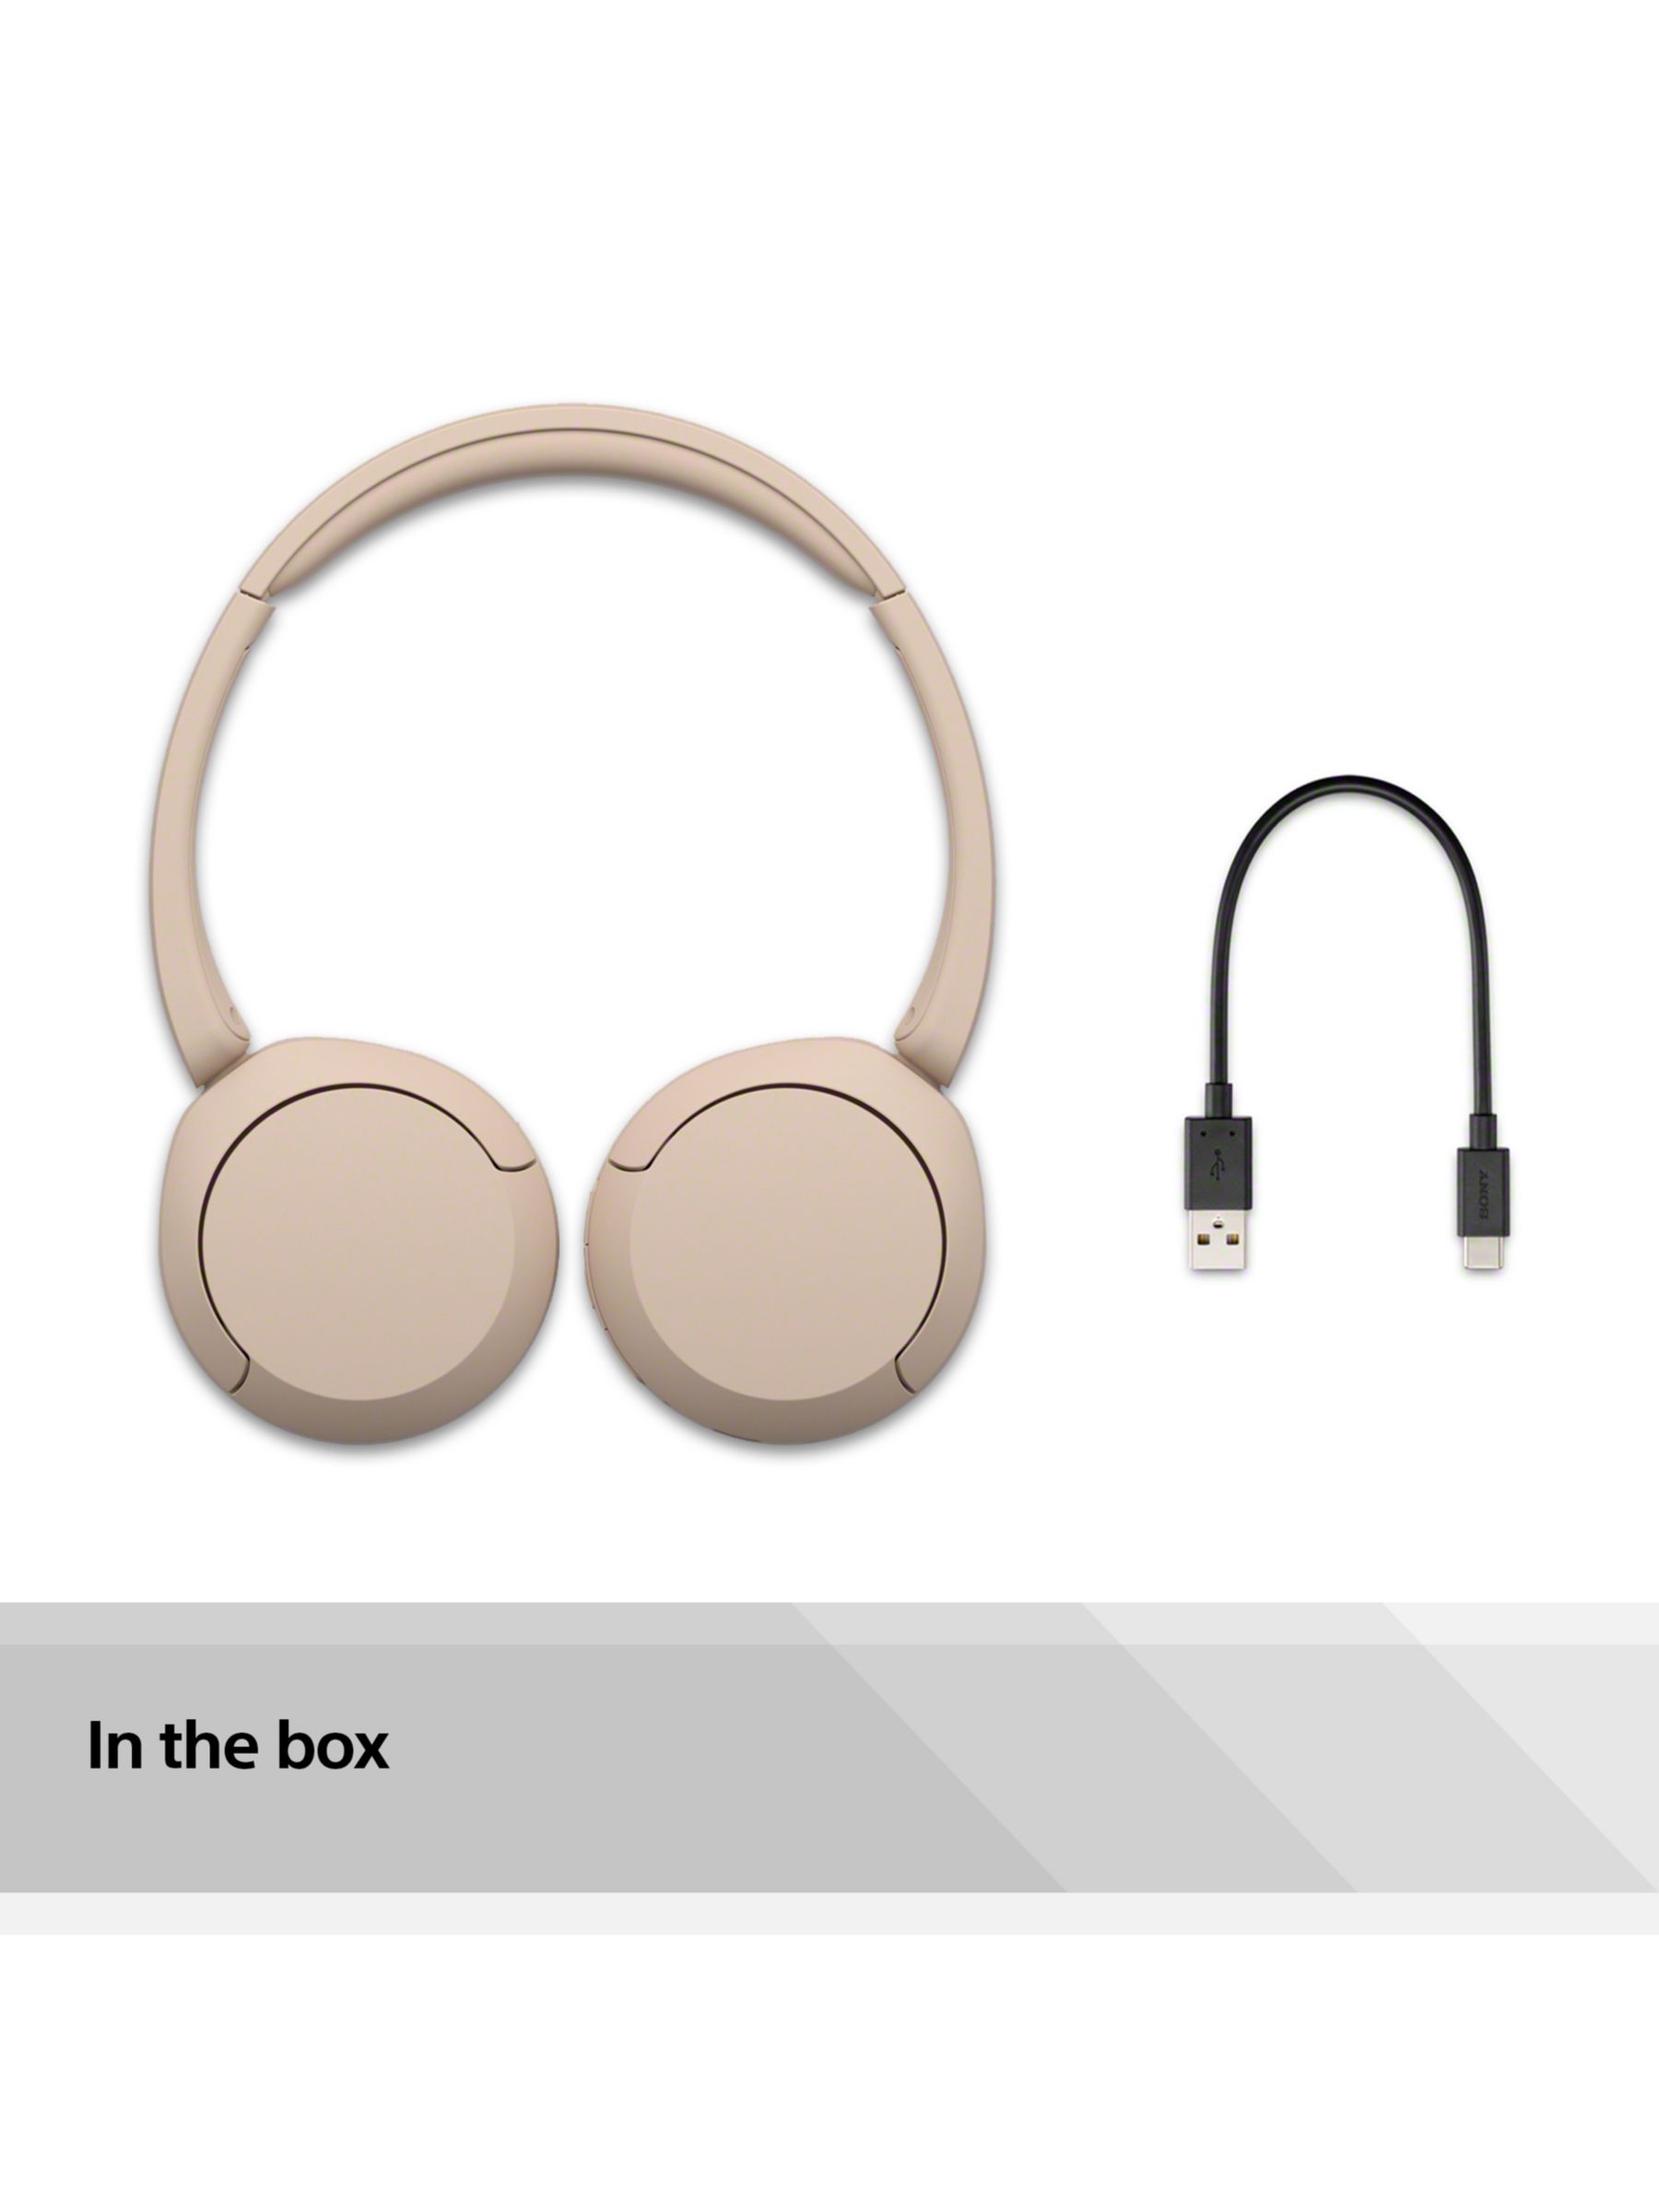  Sony WH-CH520 Best Wireless Bluetooth On-Ear Headphones with  Microphone for Calls and Voice Control, Up to 50 Hours Battery Life with  Quick Charge Function, Includes USB-C Charging Cable - Beige 